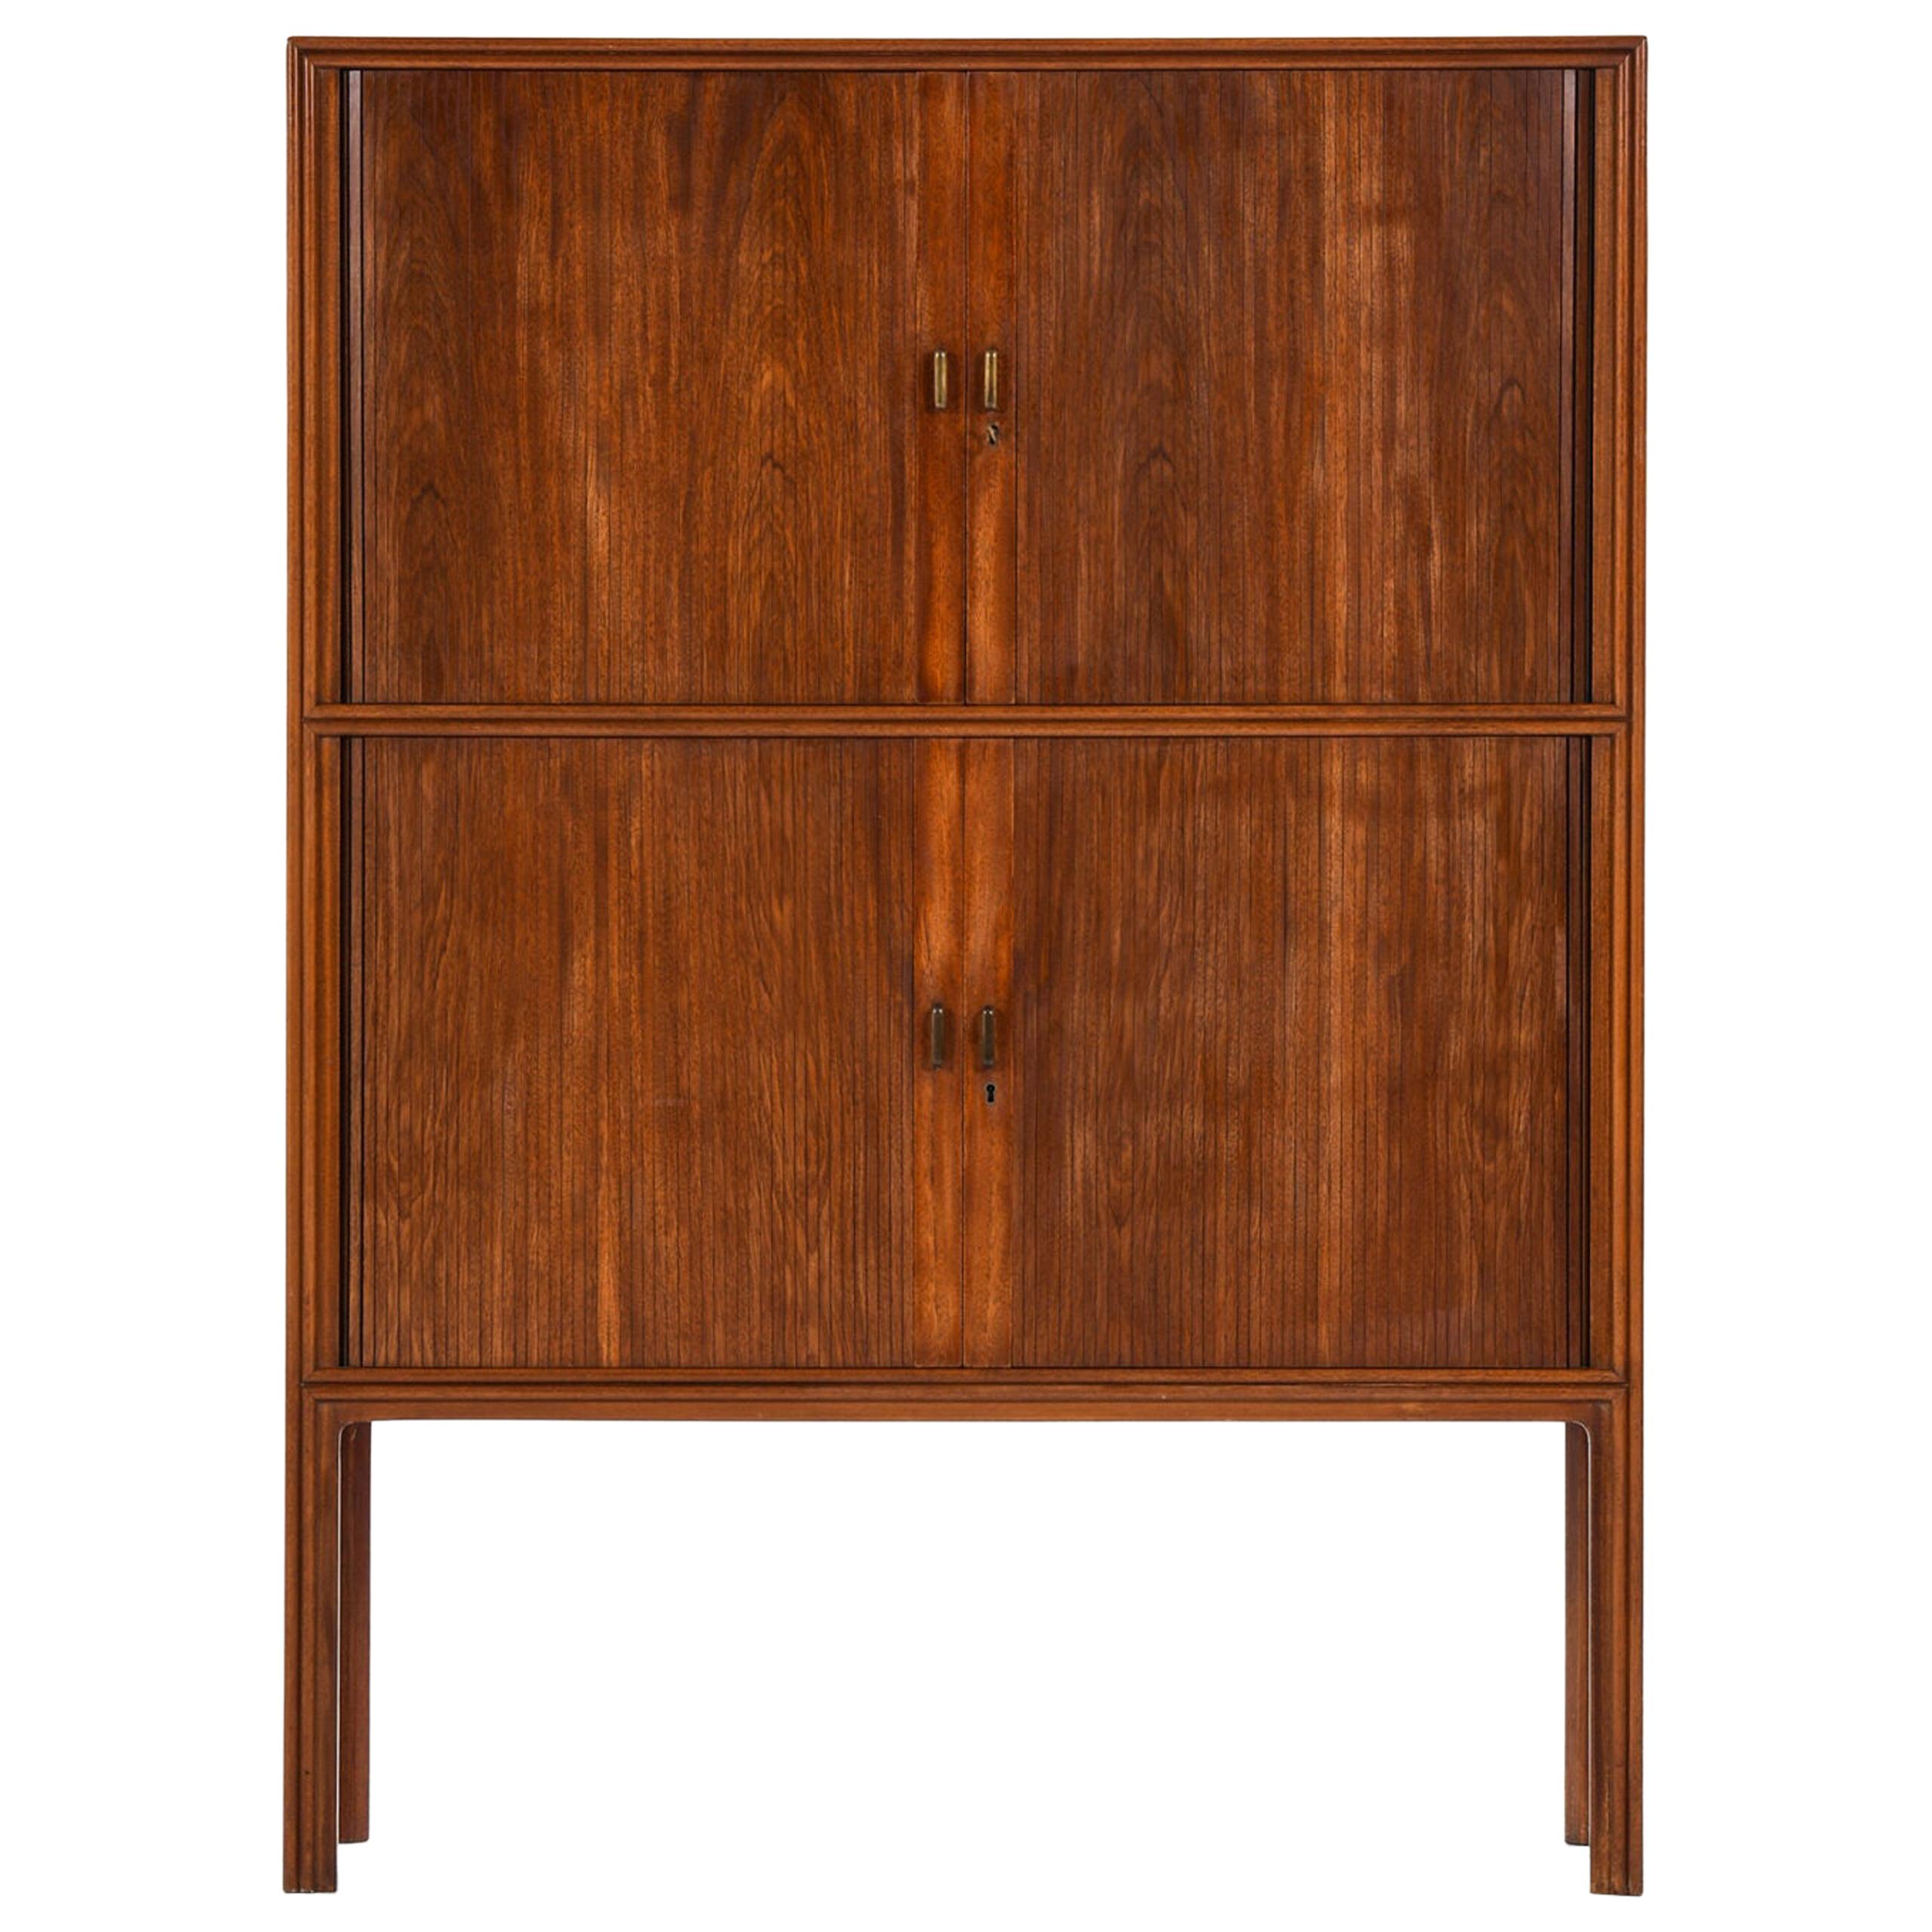 Cabinet with Tambour Doors Attributed to Jacob Kjær